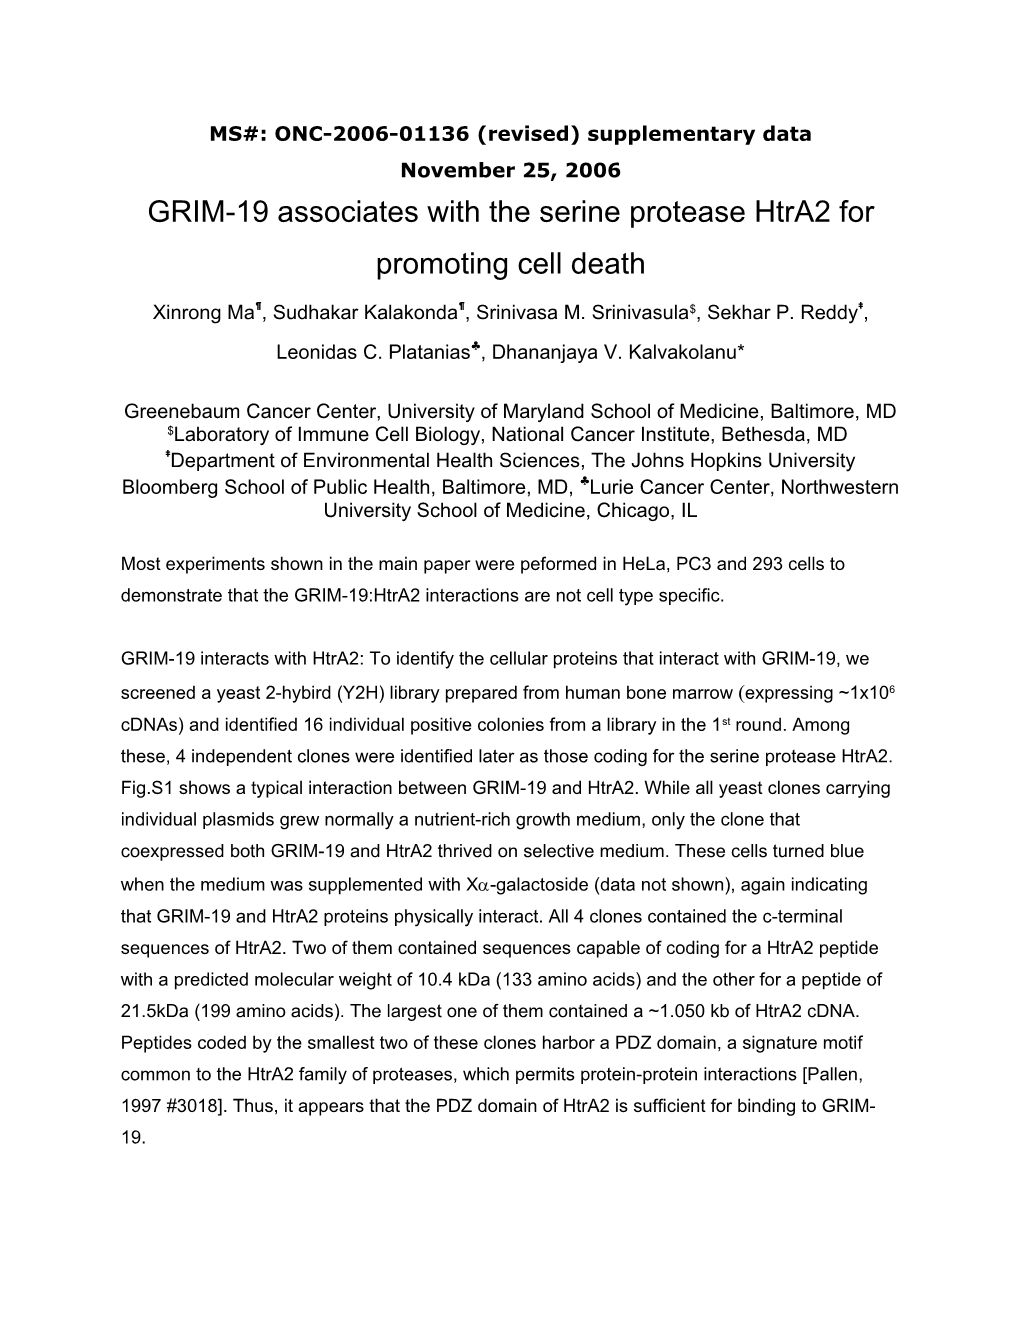 GRIM-19 Interacts with Htra2: to Identify the Cellular Proteins That Interact with GRIM-19